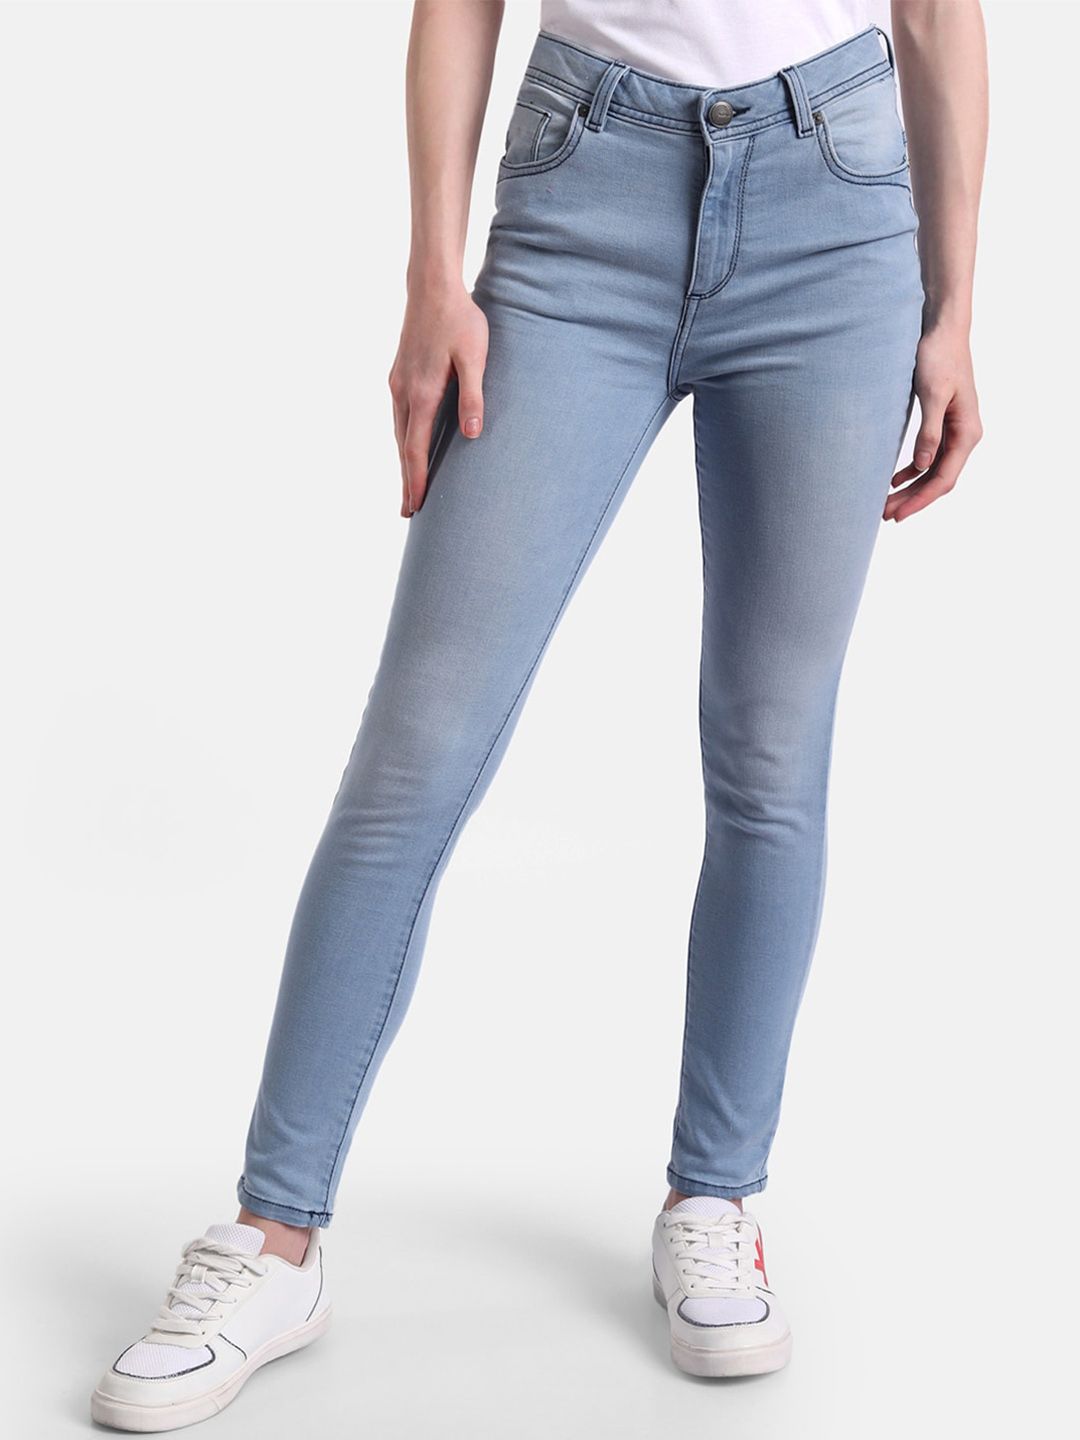 United Colors of Benetton Women Blue Skinny Fit Jeans Price in India